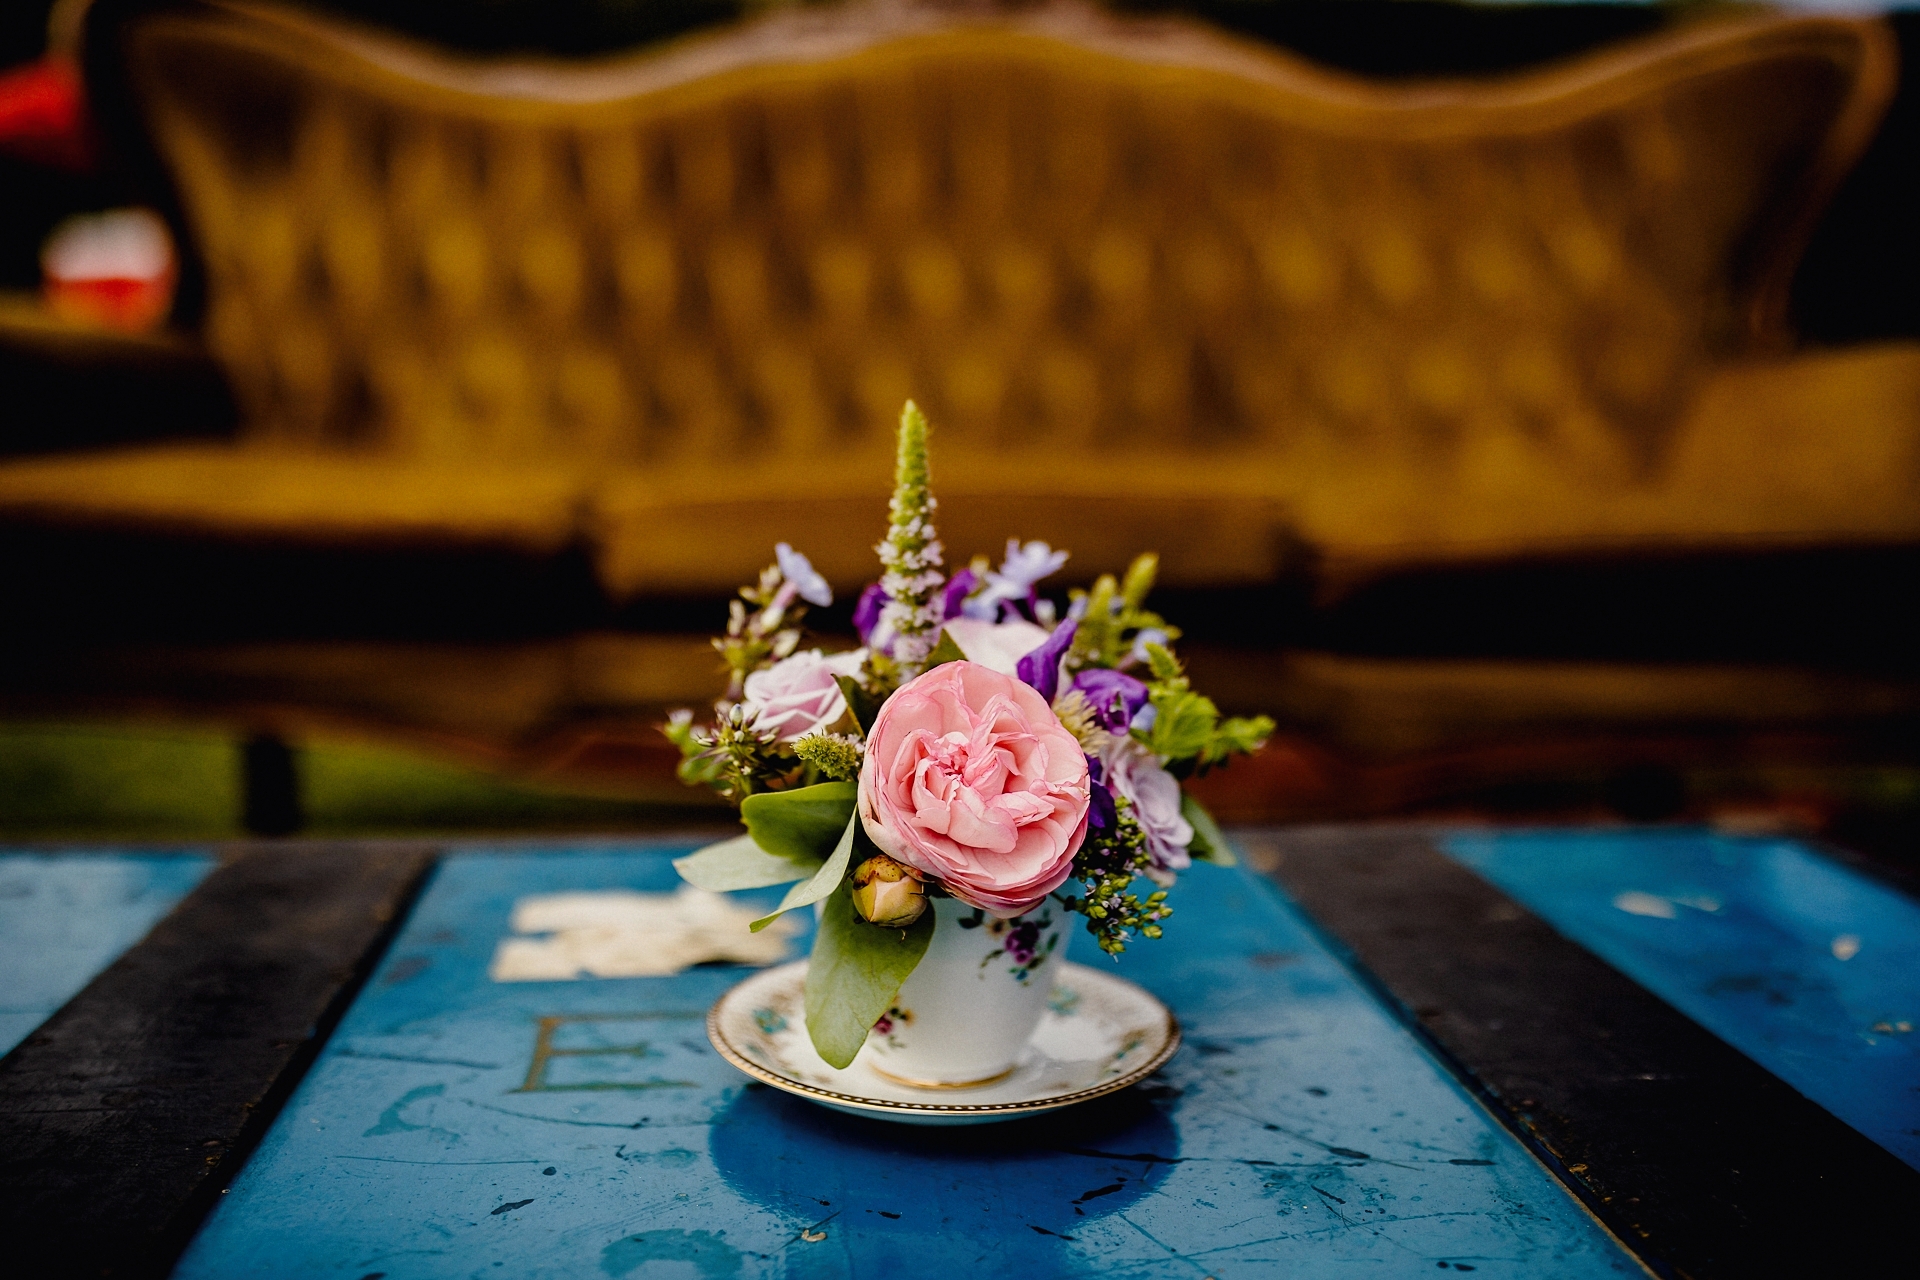 details from the vineyard wedding in kent, flowers in tea cup on table, vintage couch